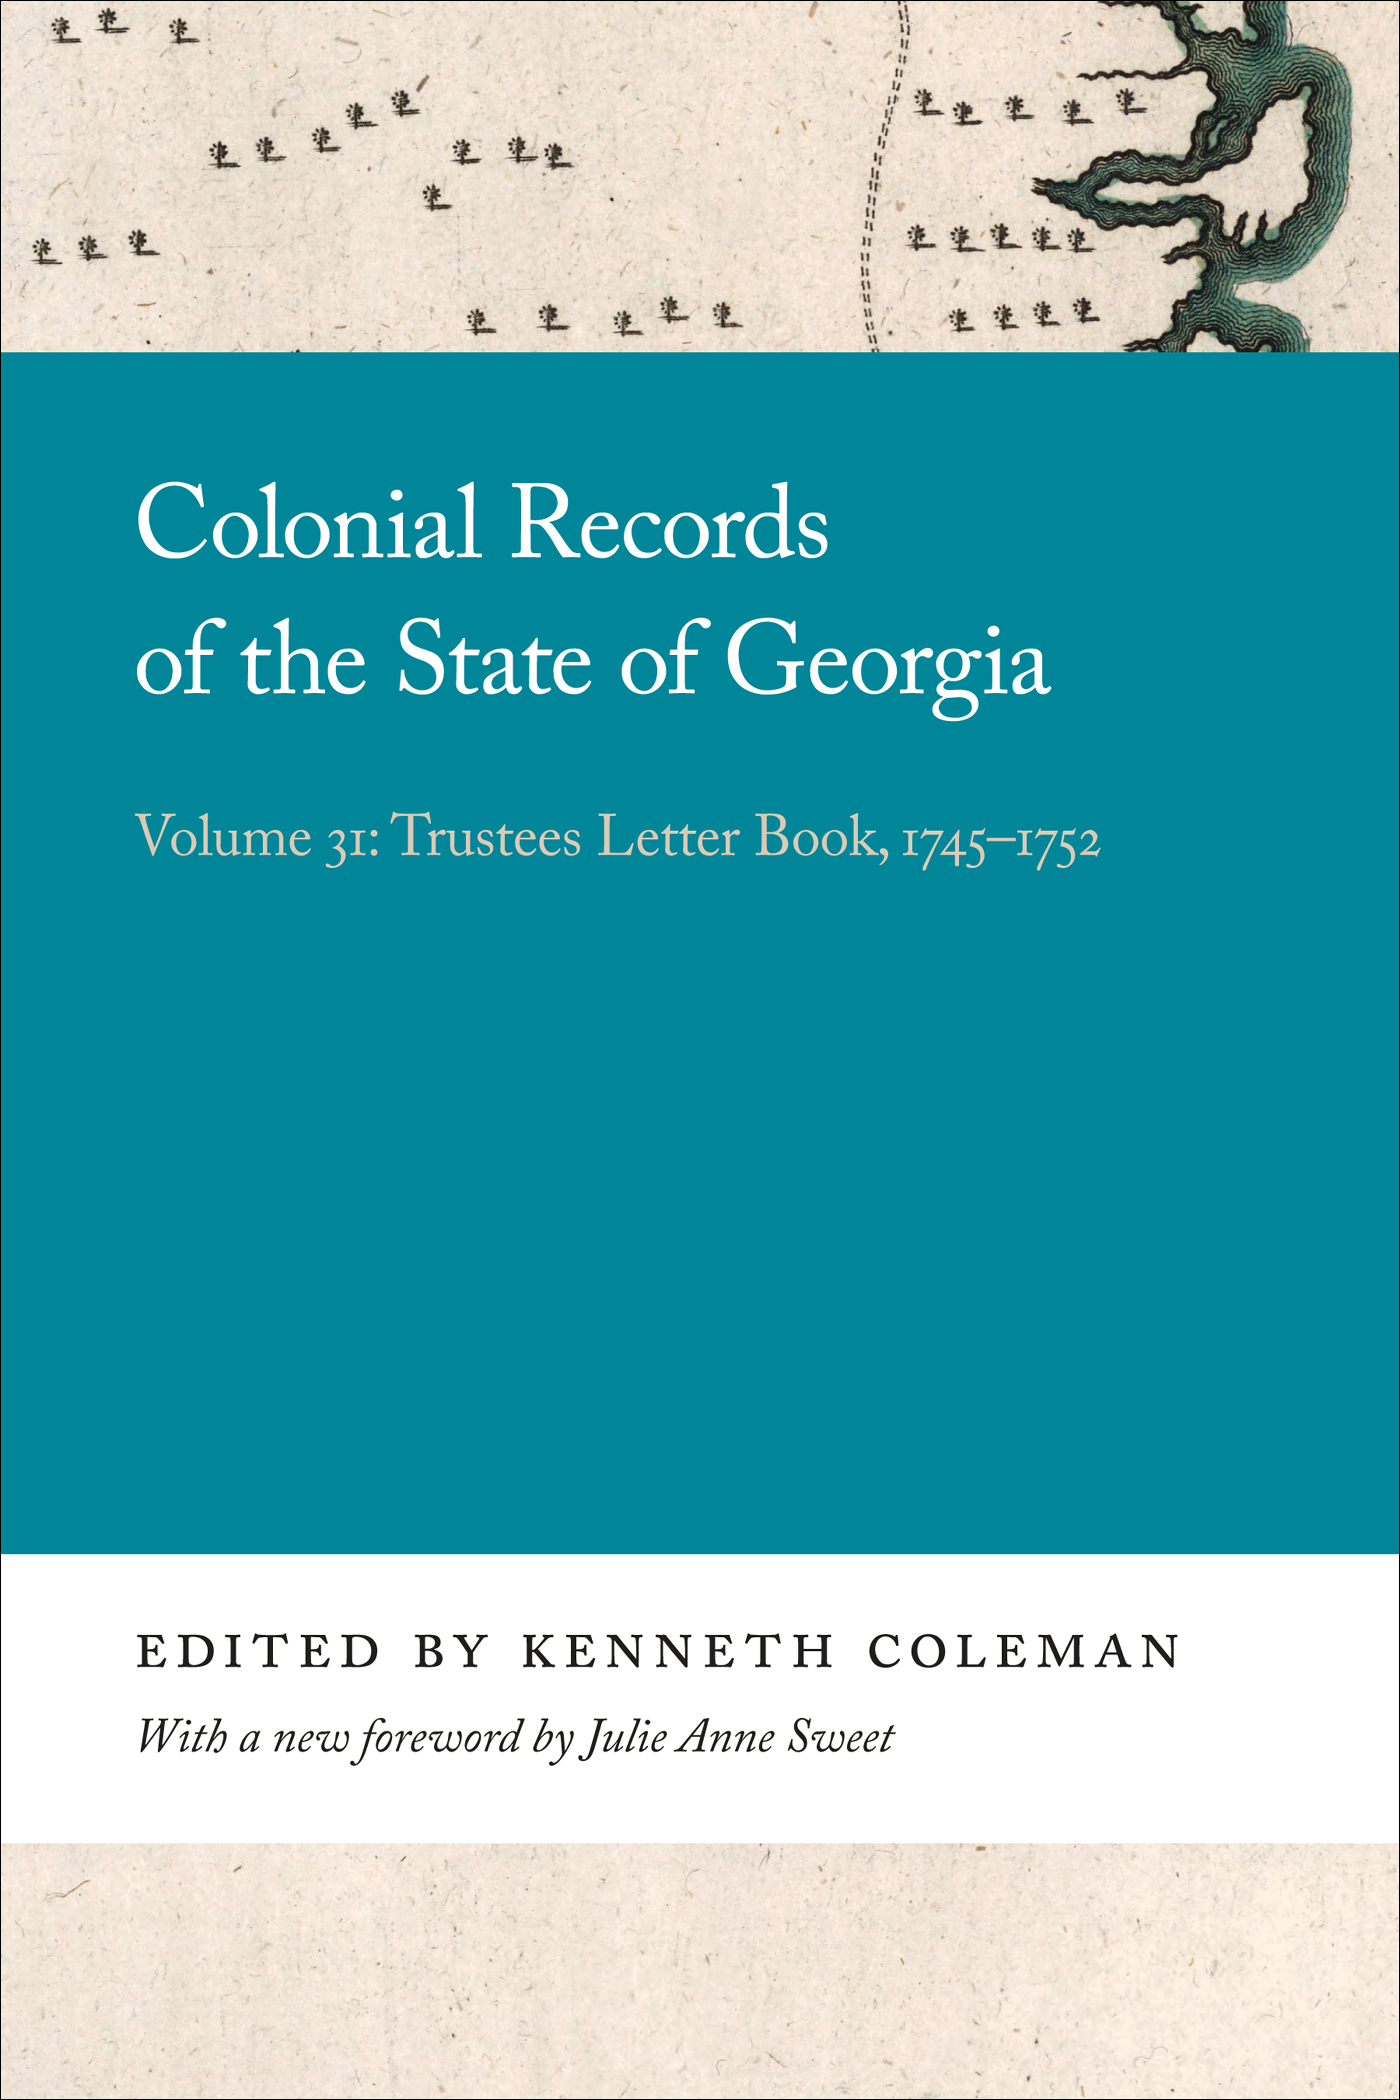 Cover of, Colonial records of the State of Georgia, volume 31 : trustees letter book, 1745 to 1752.